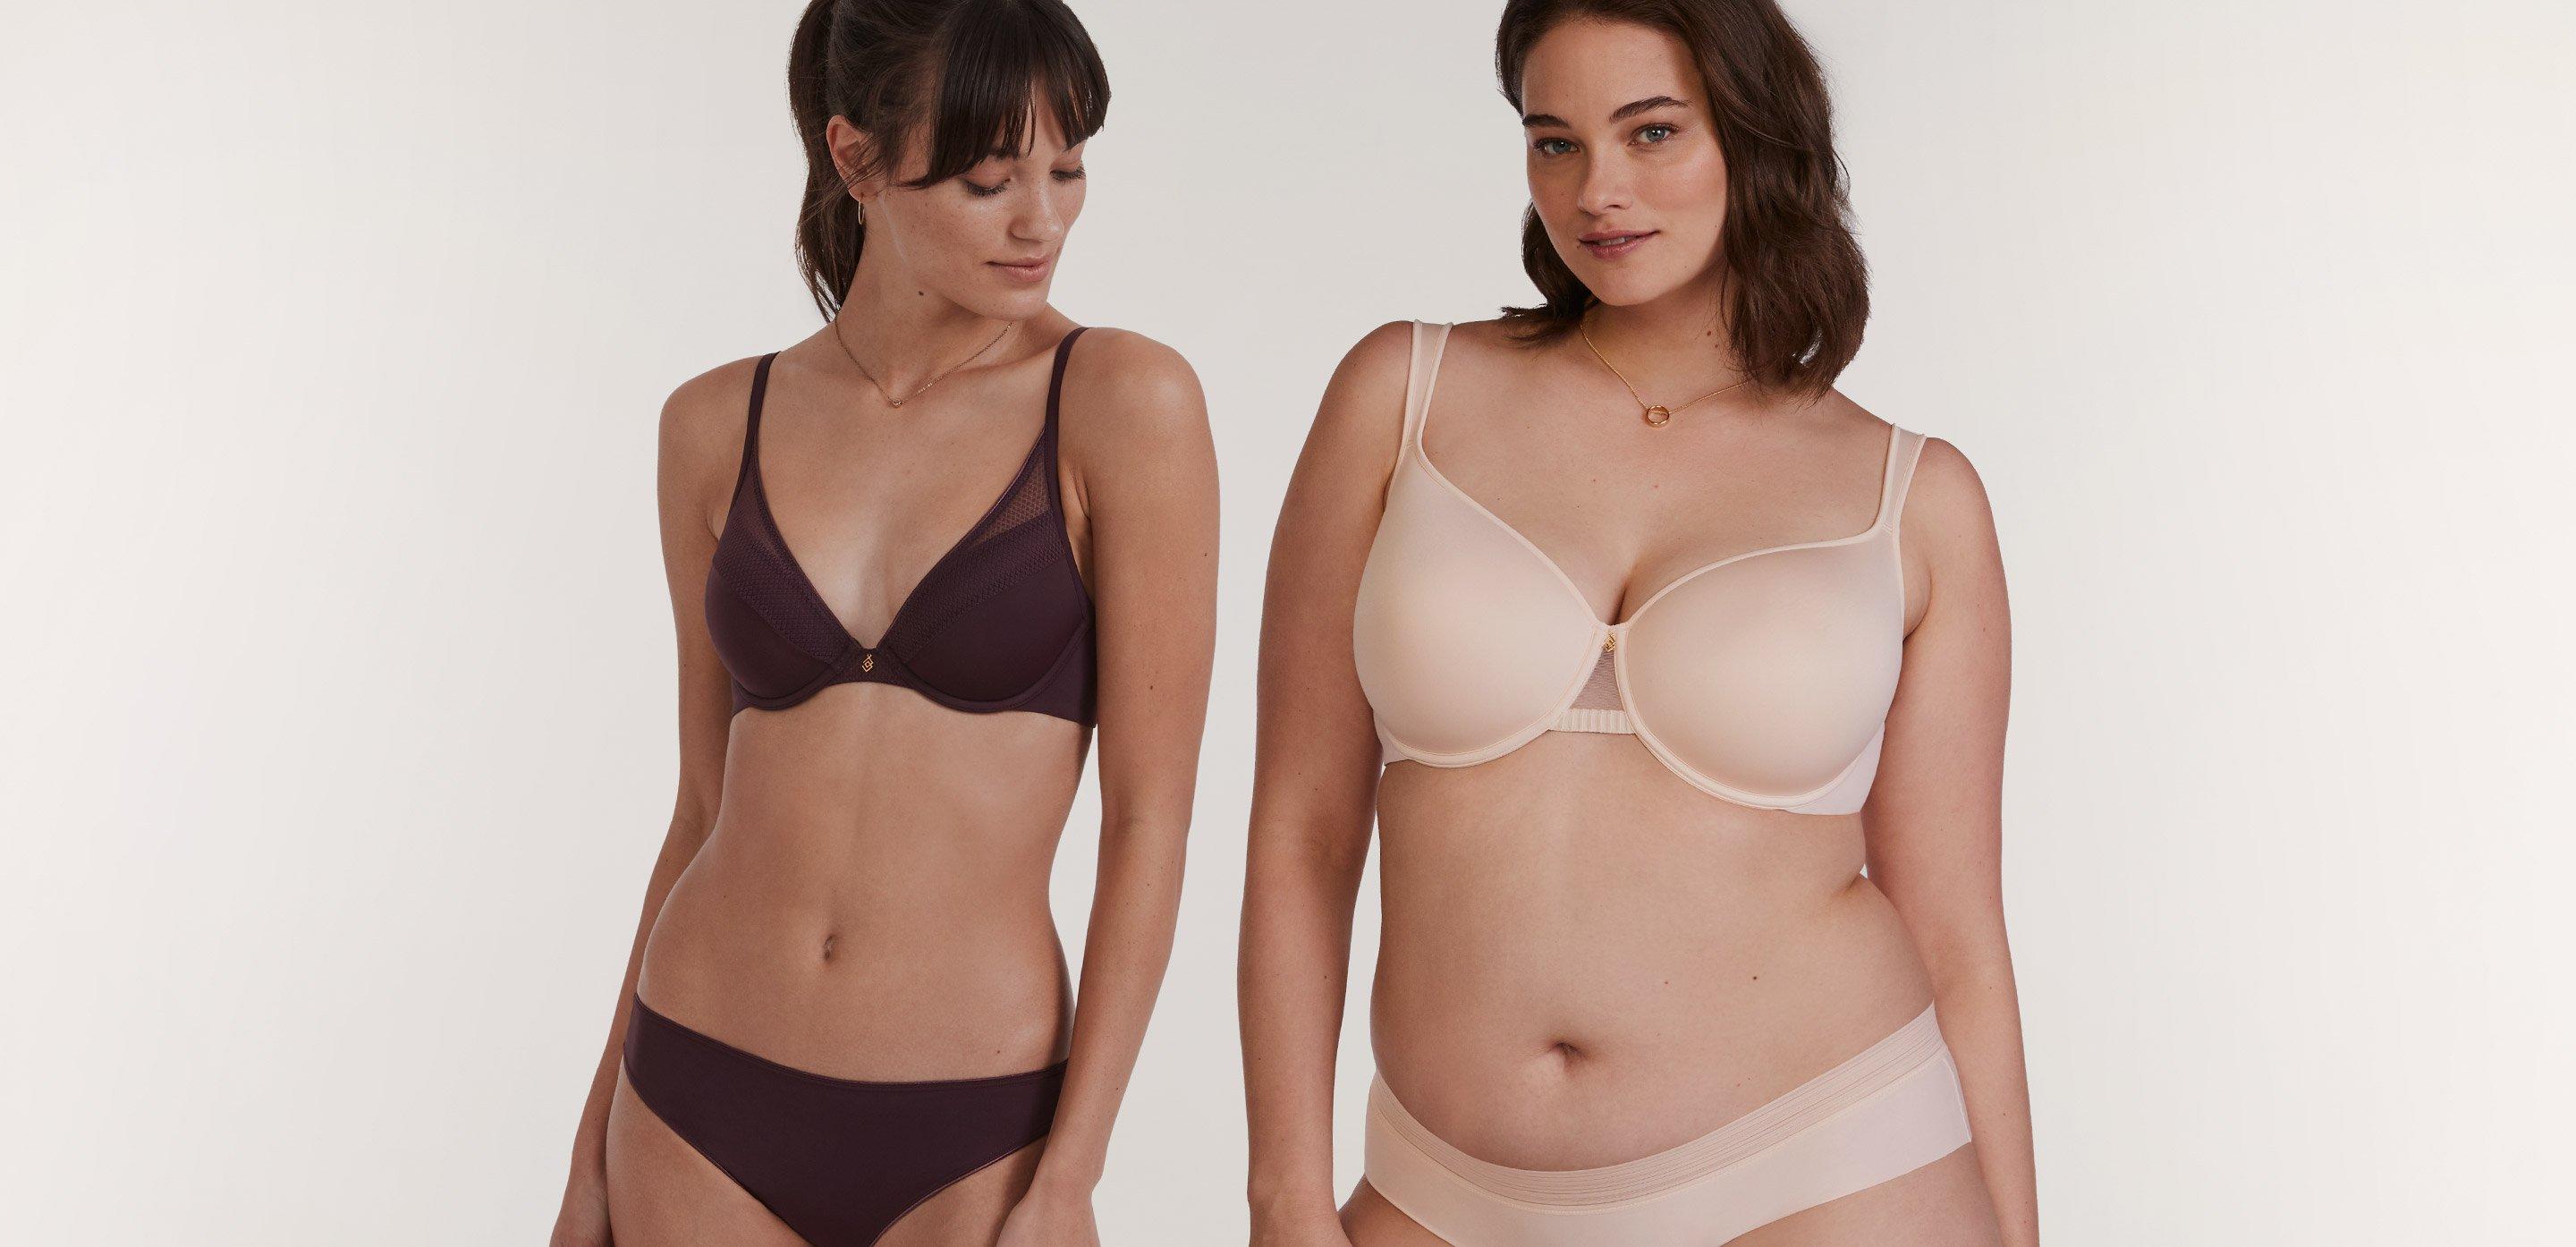 Find a Bra That Fits: How to Lift Sagging Breasts with the Right Bra